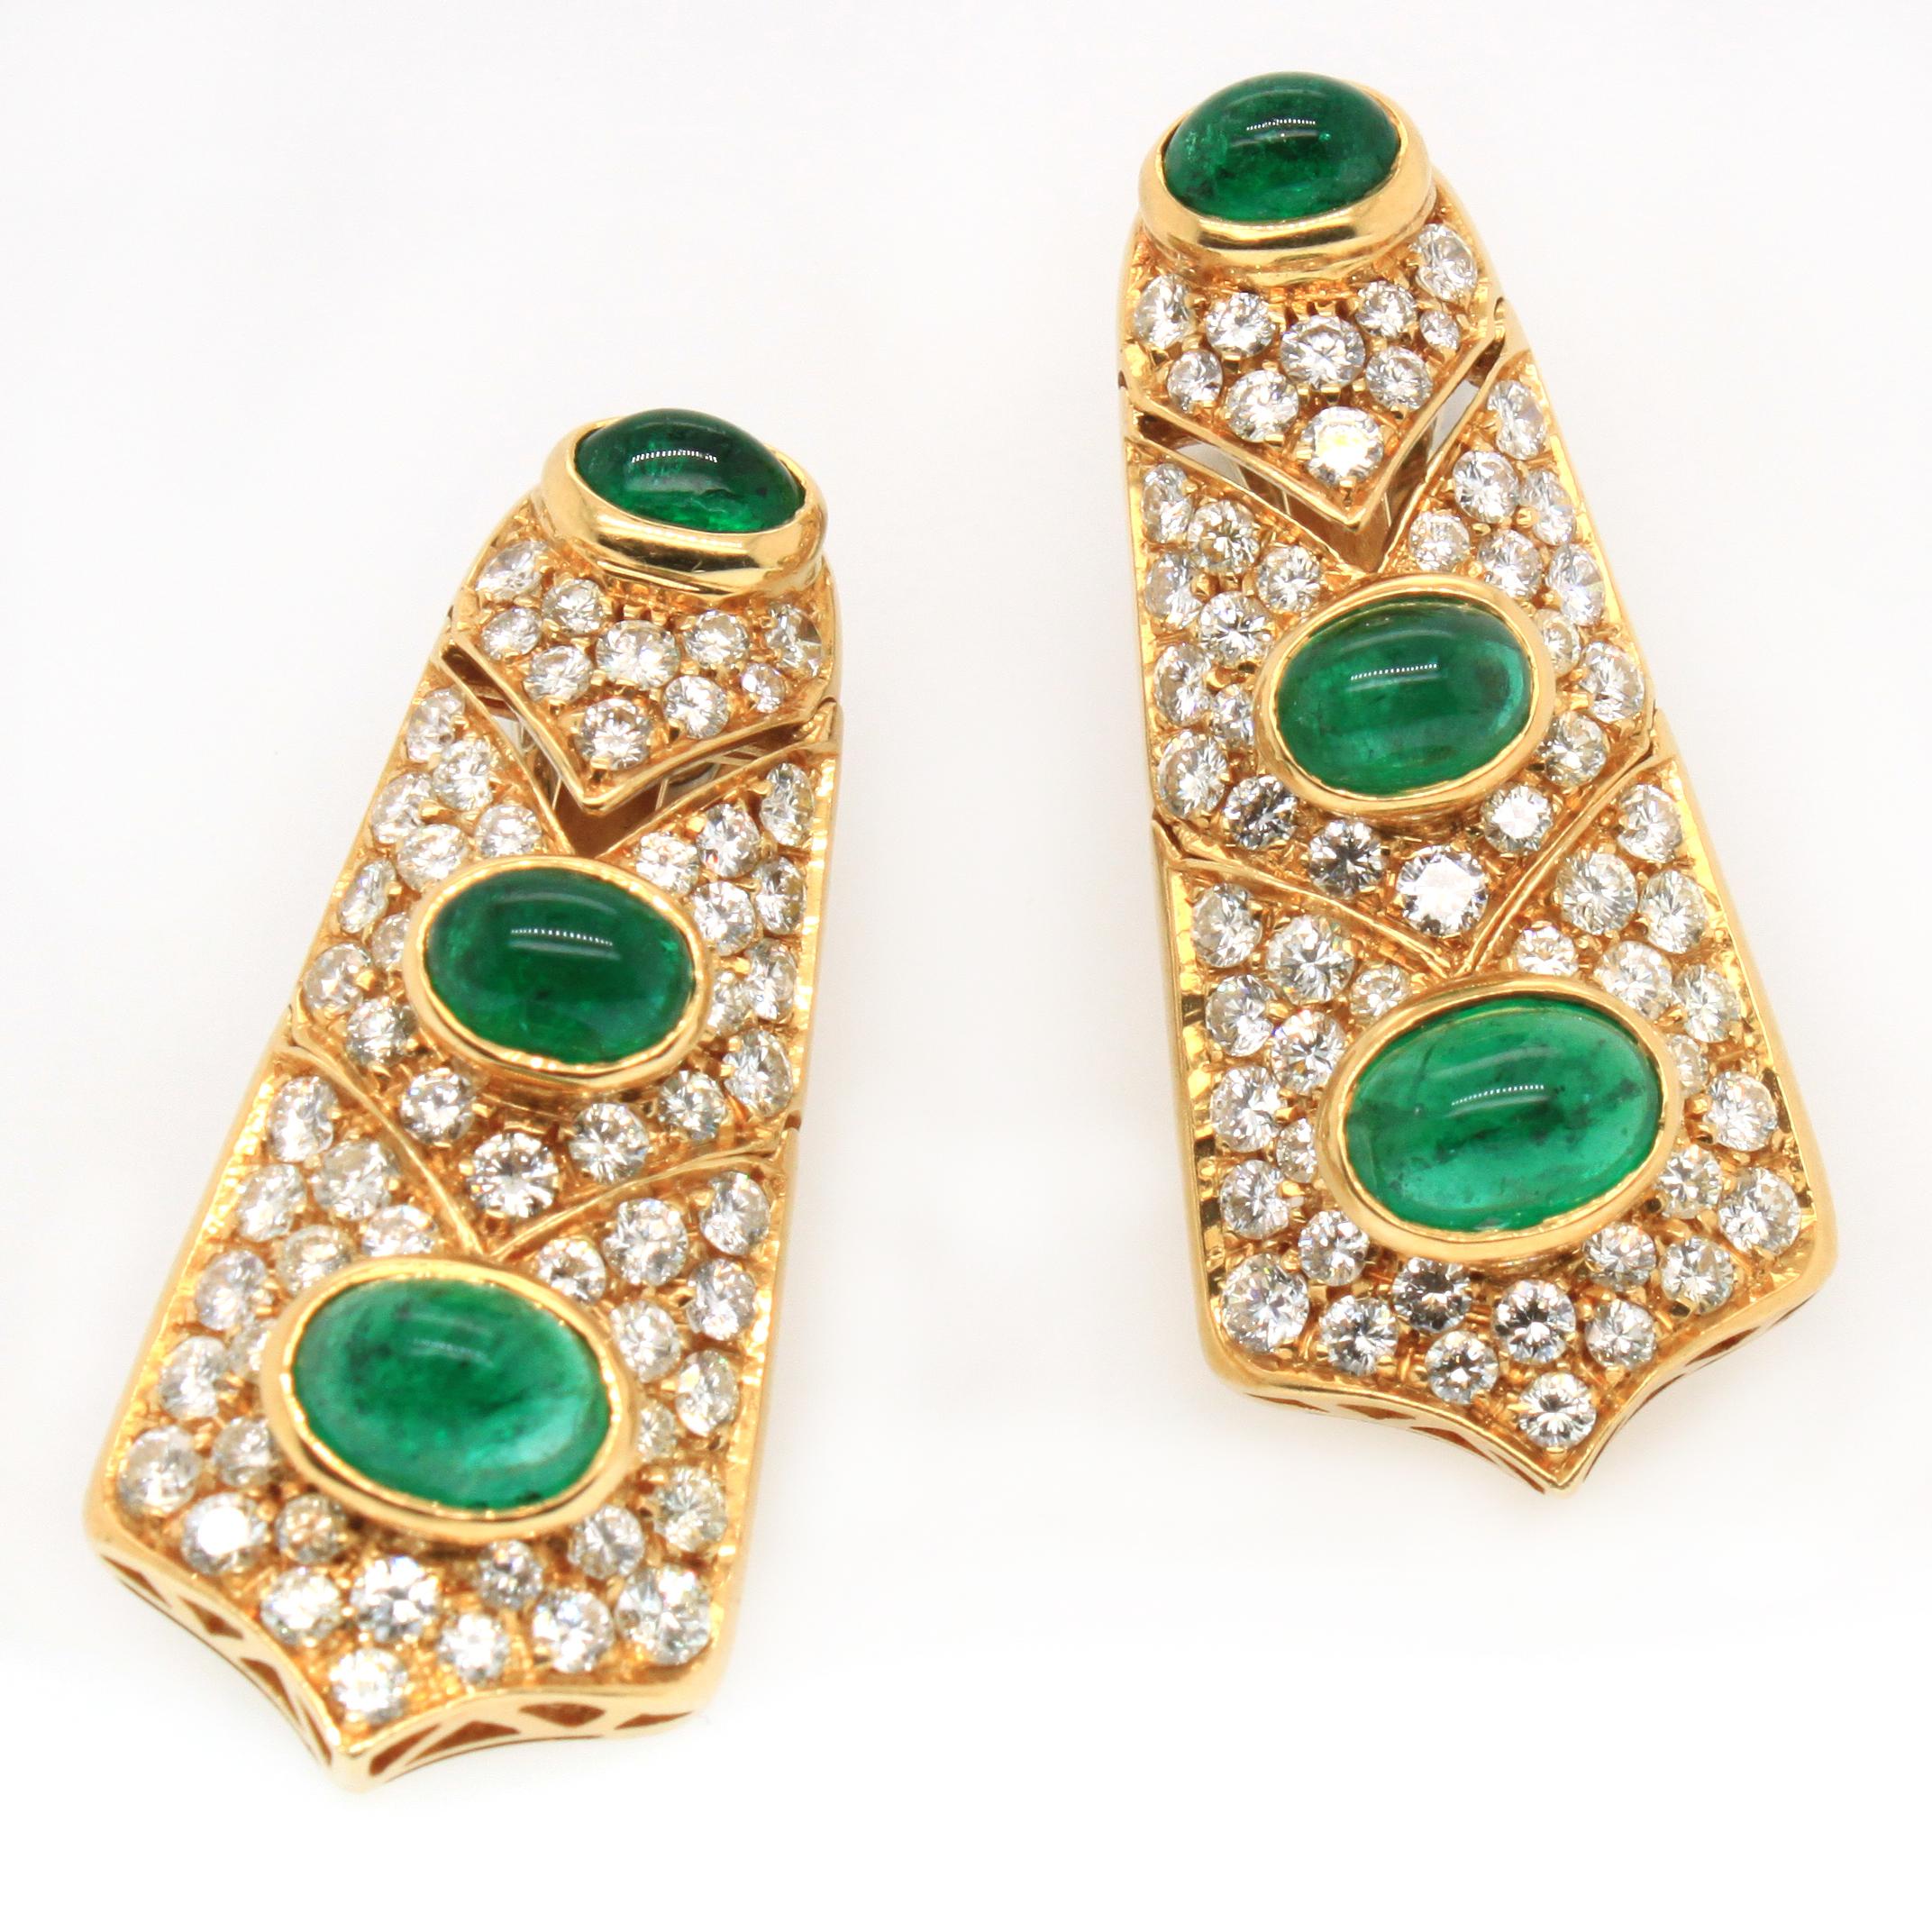 Emerald cabochon and round brilliant cut diamond earrings in 18k yellow gold. The earrings have three moving parts in an oriental/chevron design, each studded with an emerald cabochon and smaller diamonds. The emerald have a strong  and transparent